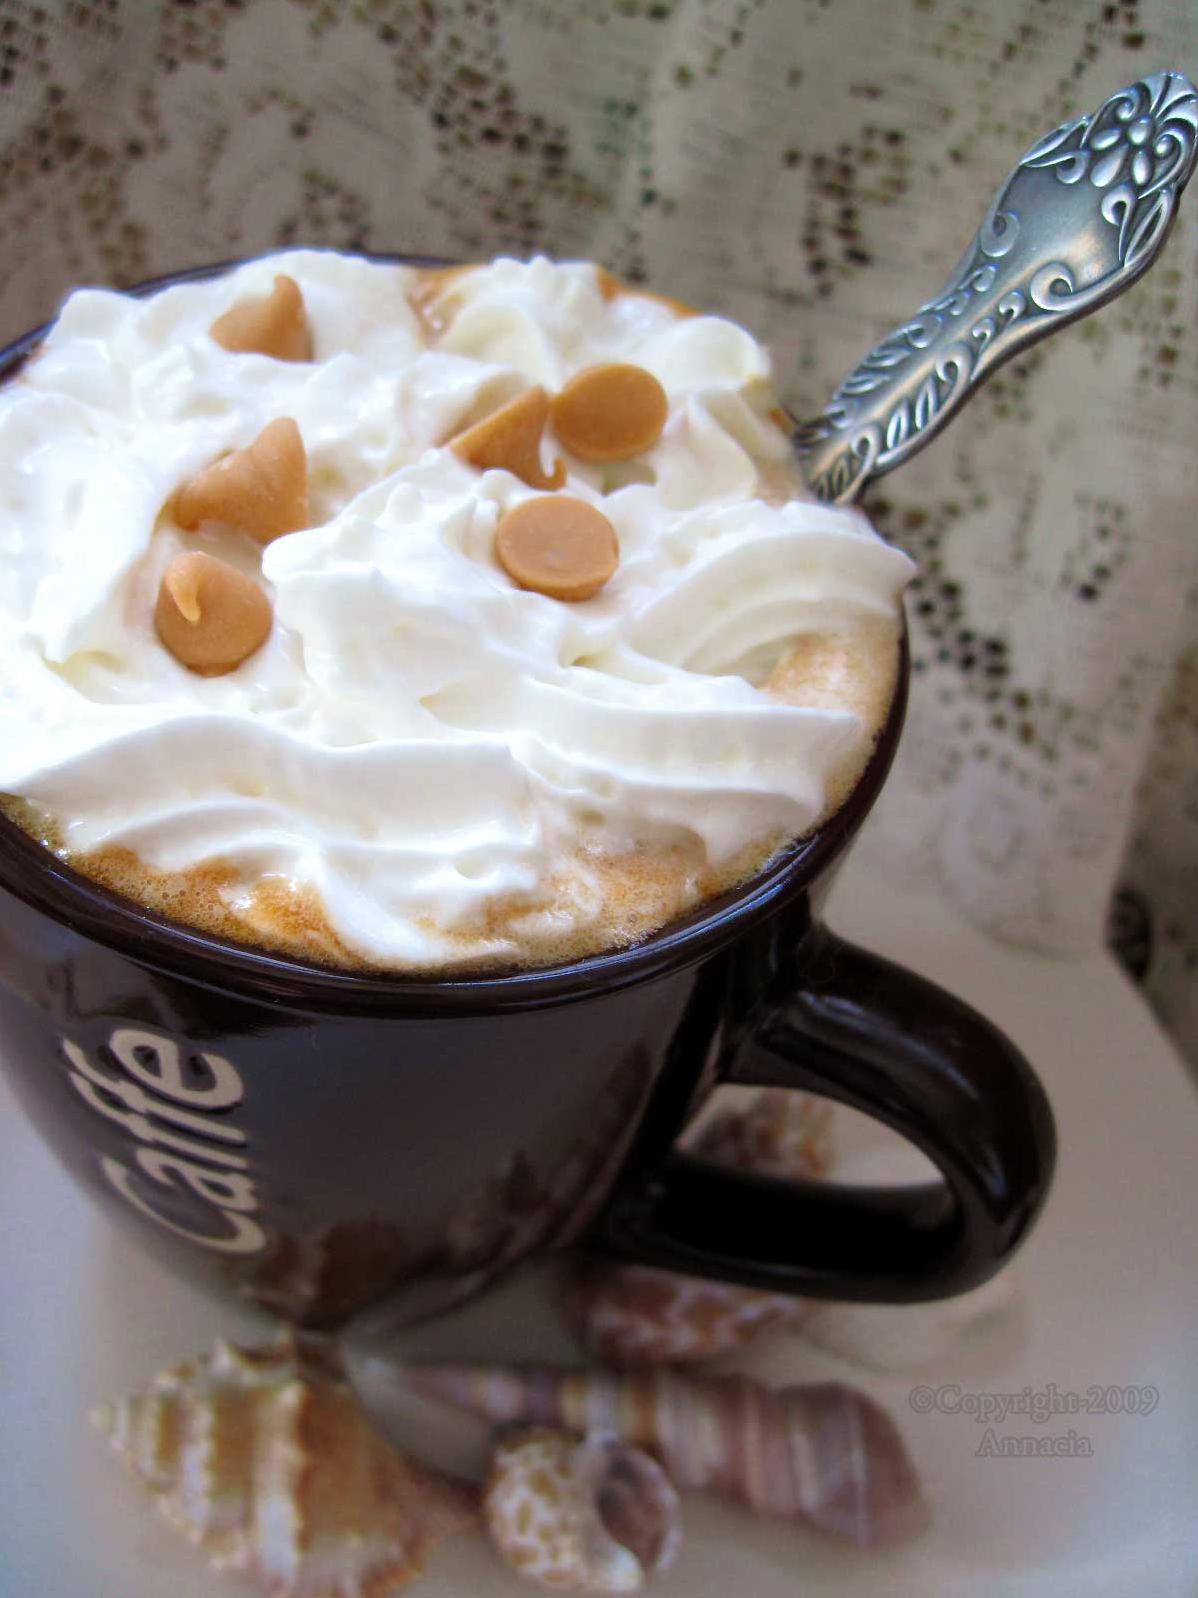  When life hands you lemons, make coffee. Specifically, make this delicious Carnation Caramel Latte.